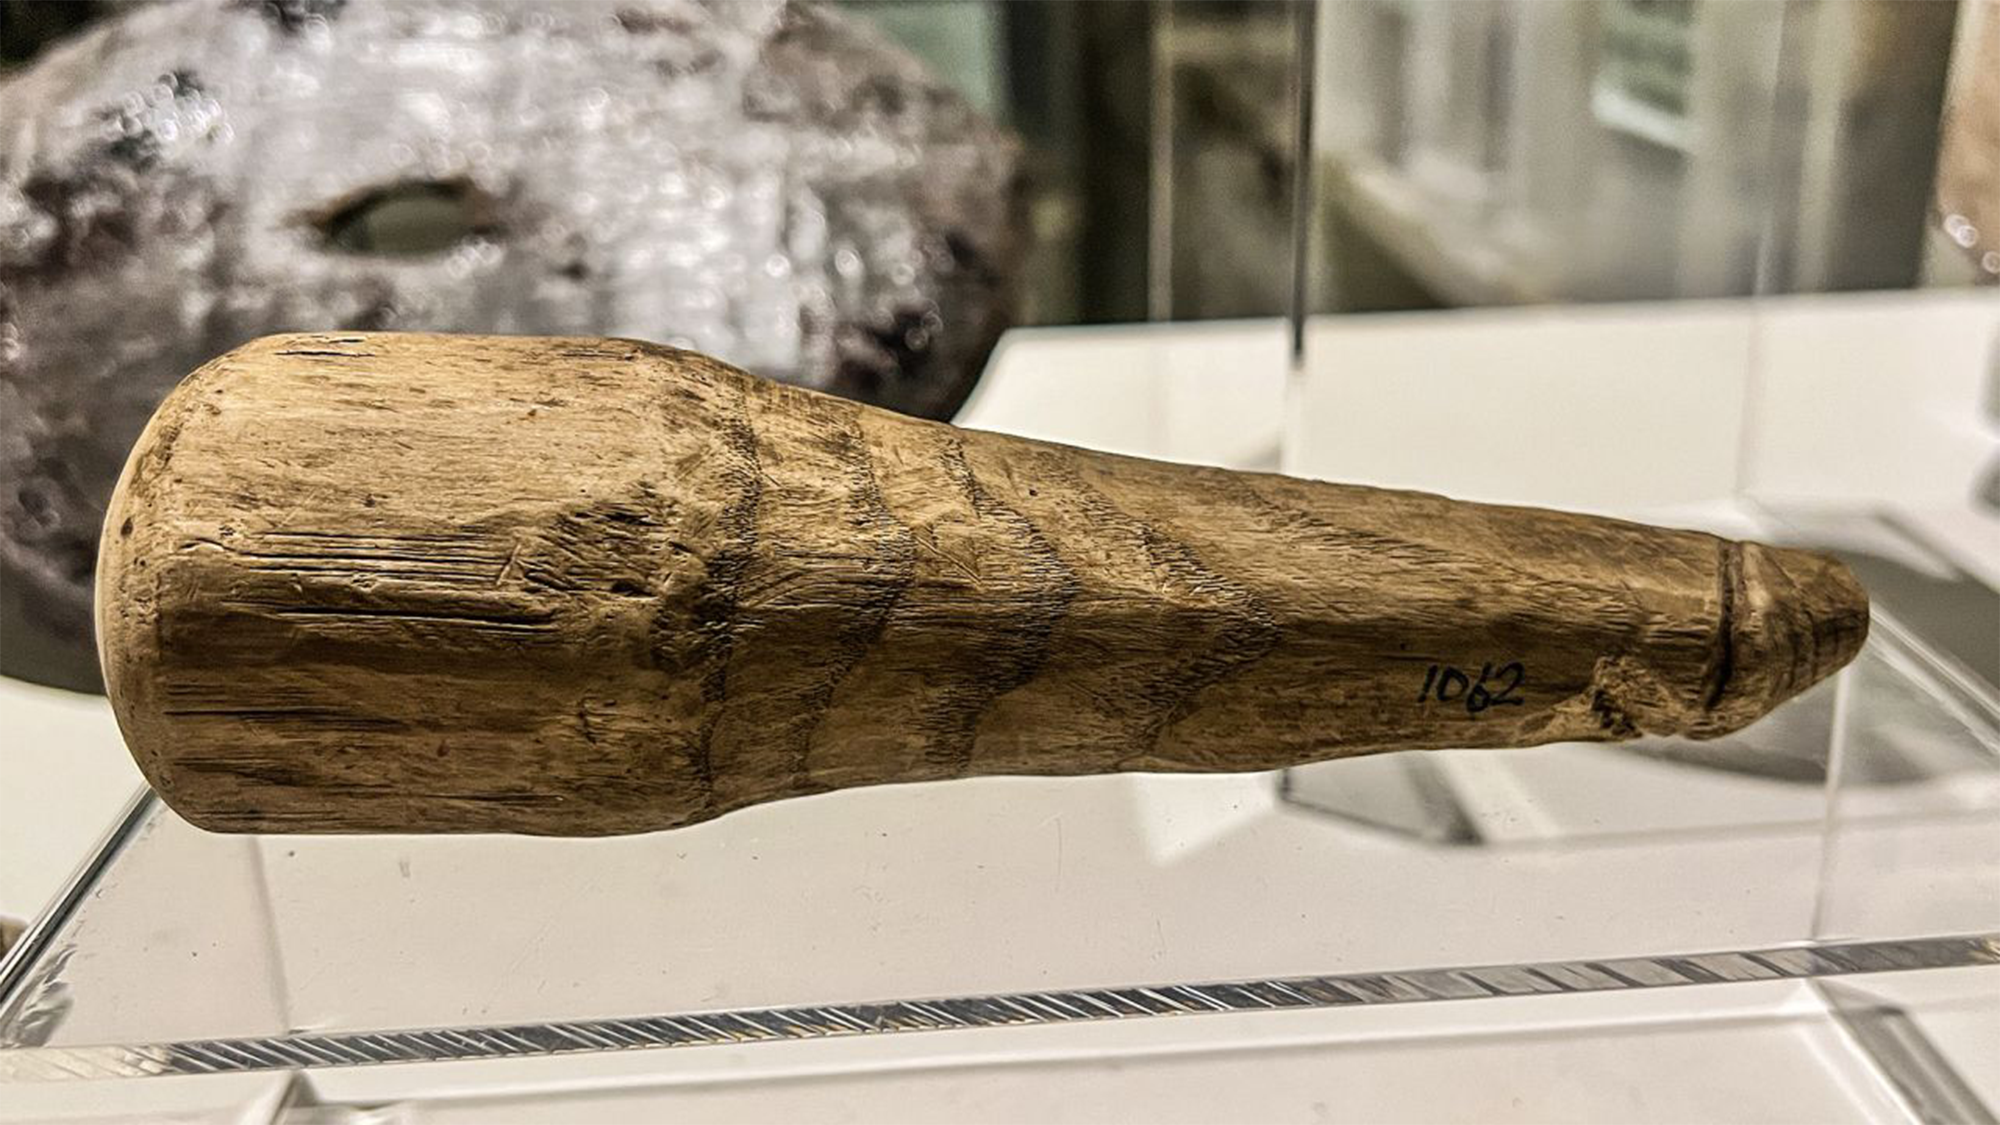 Scientists think they discovered a 2,000-year-old dildo Popular Science picture pic